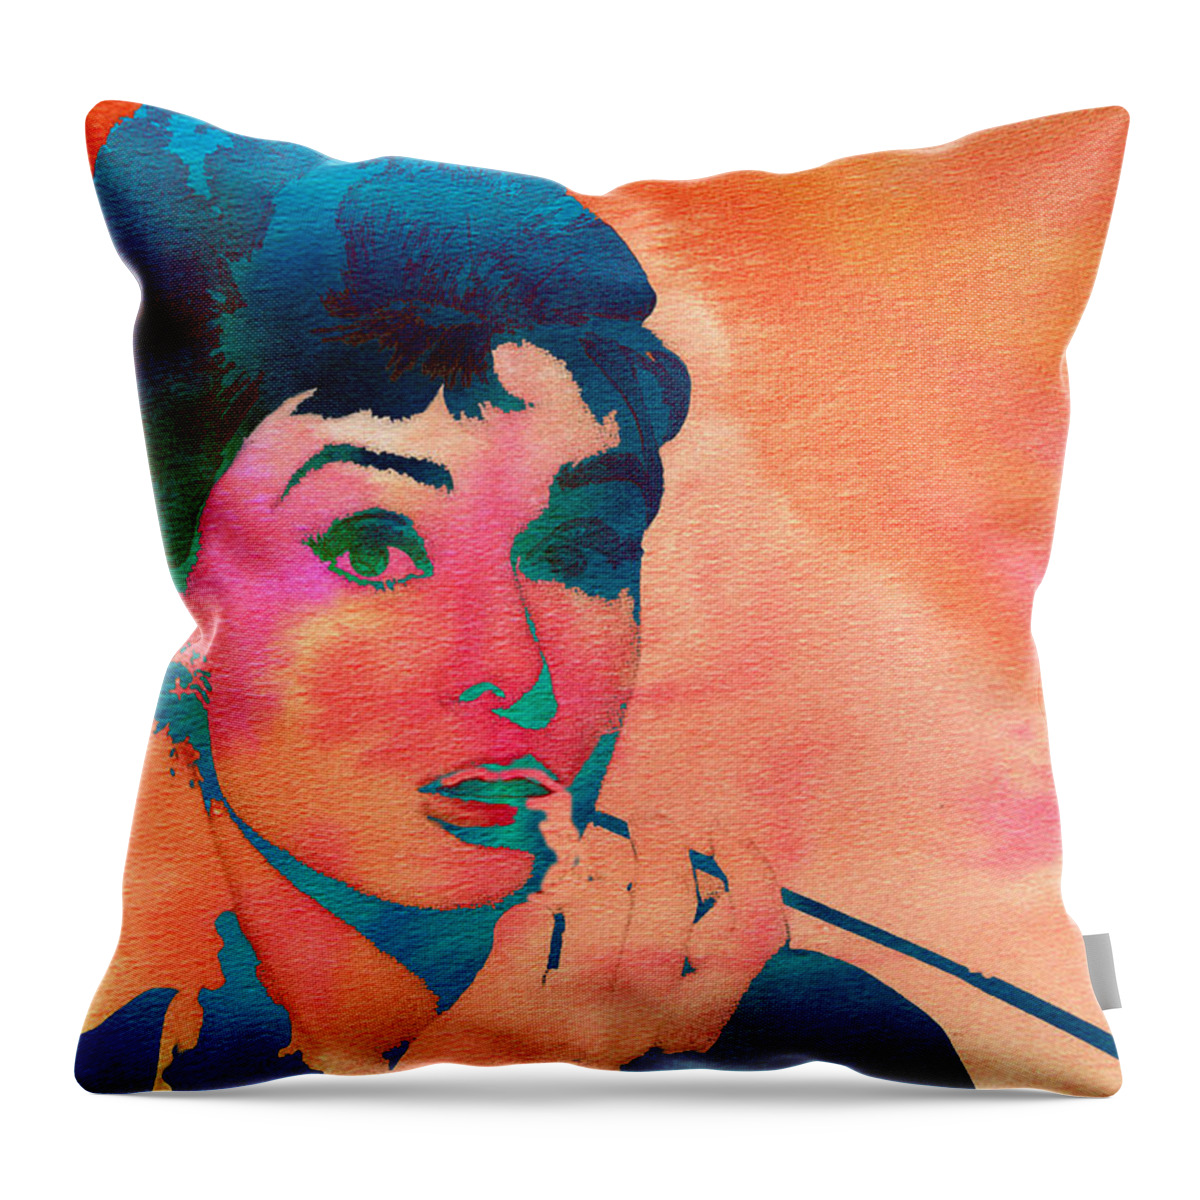 Audrey Hepburn Throw Pillow featuring the painting Audrey Hepburn 1 by Brian Reaves